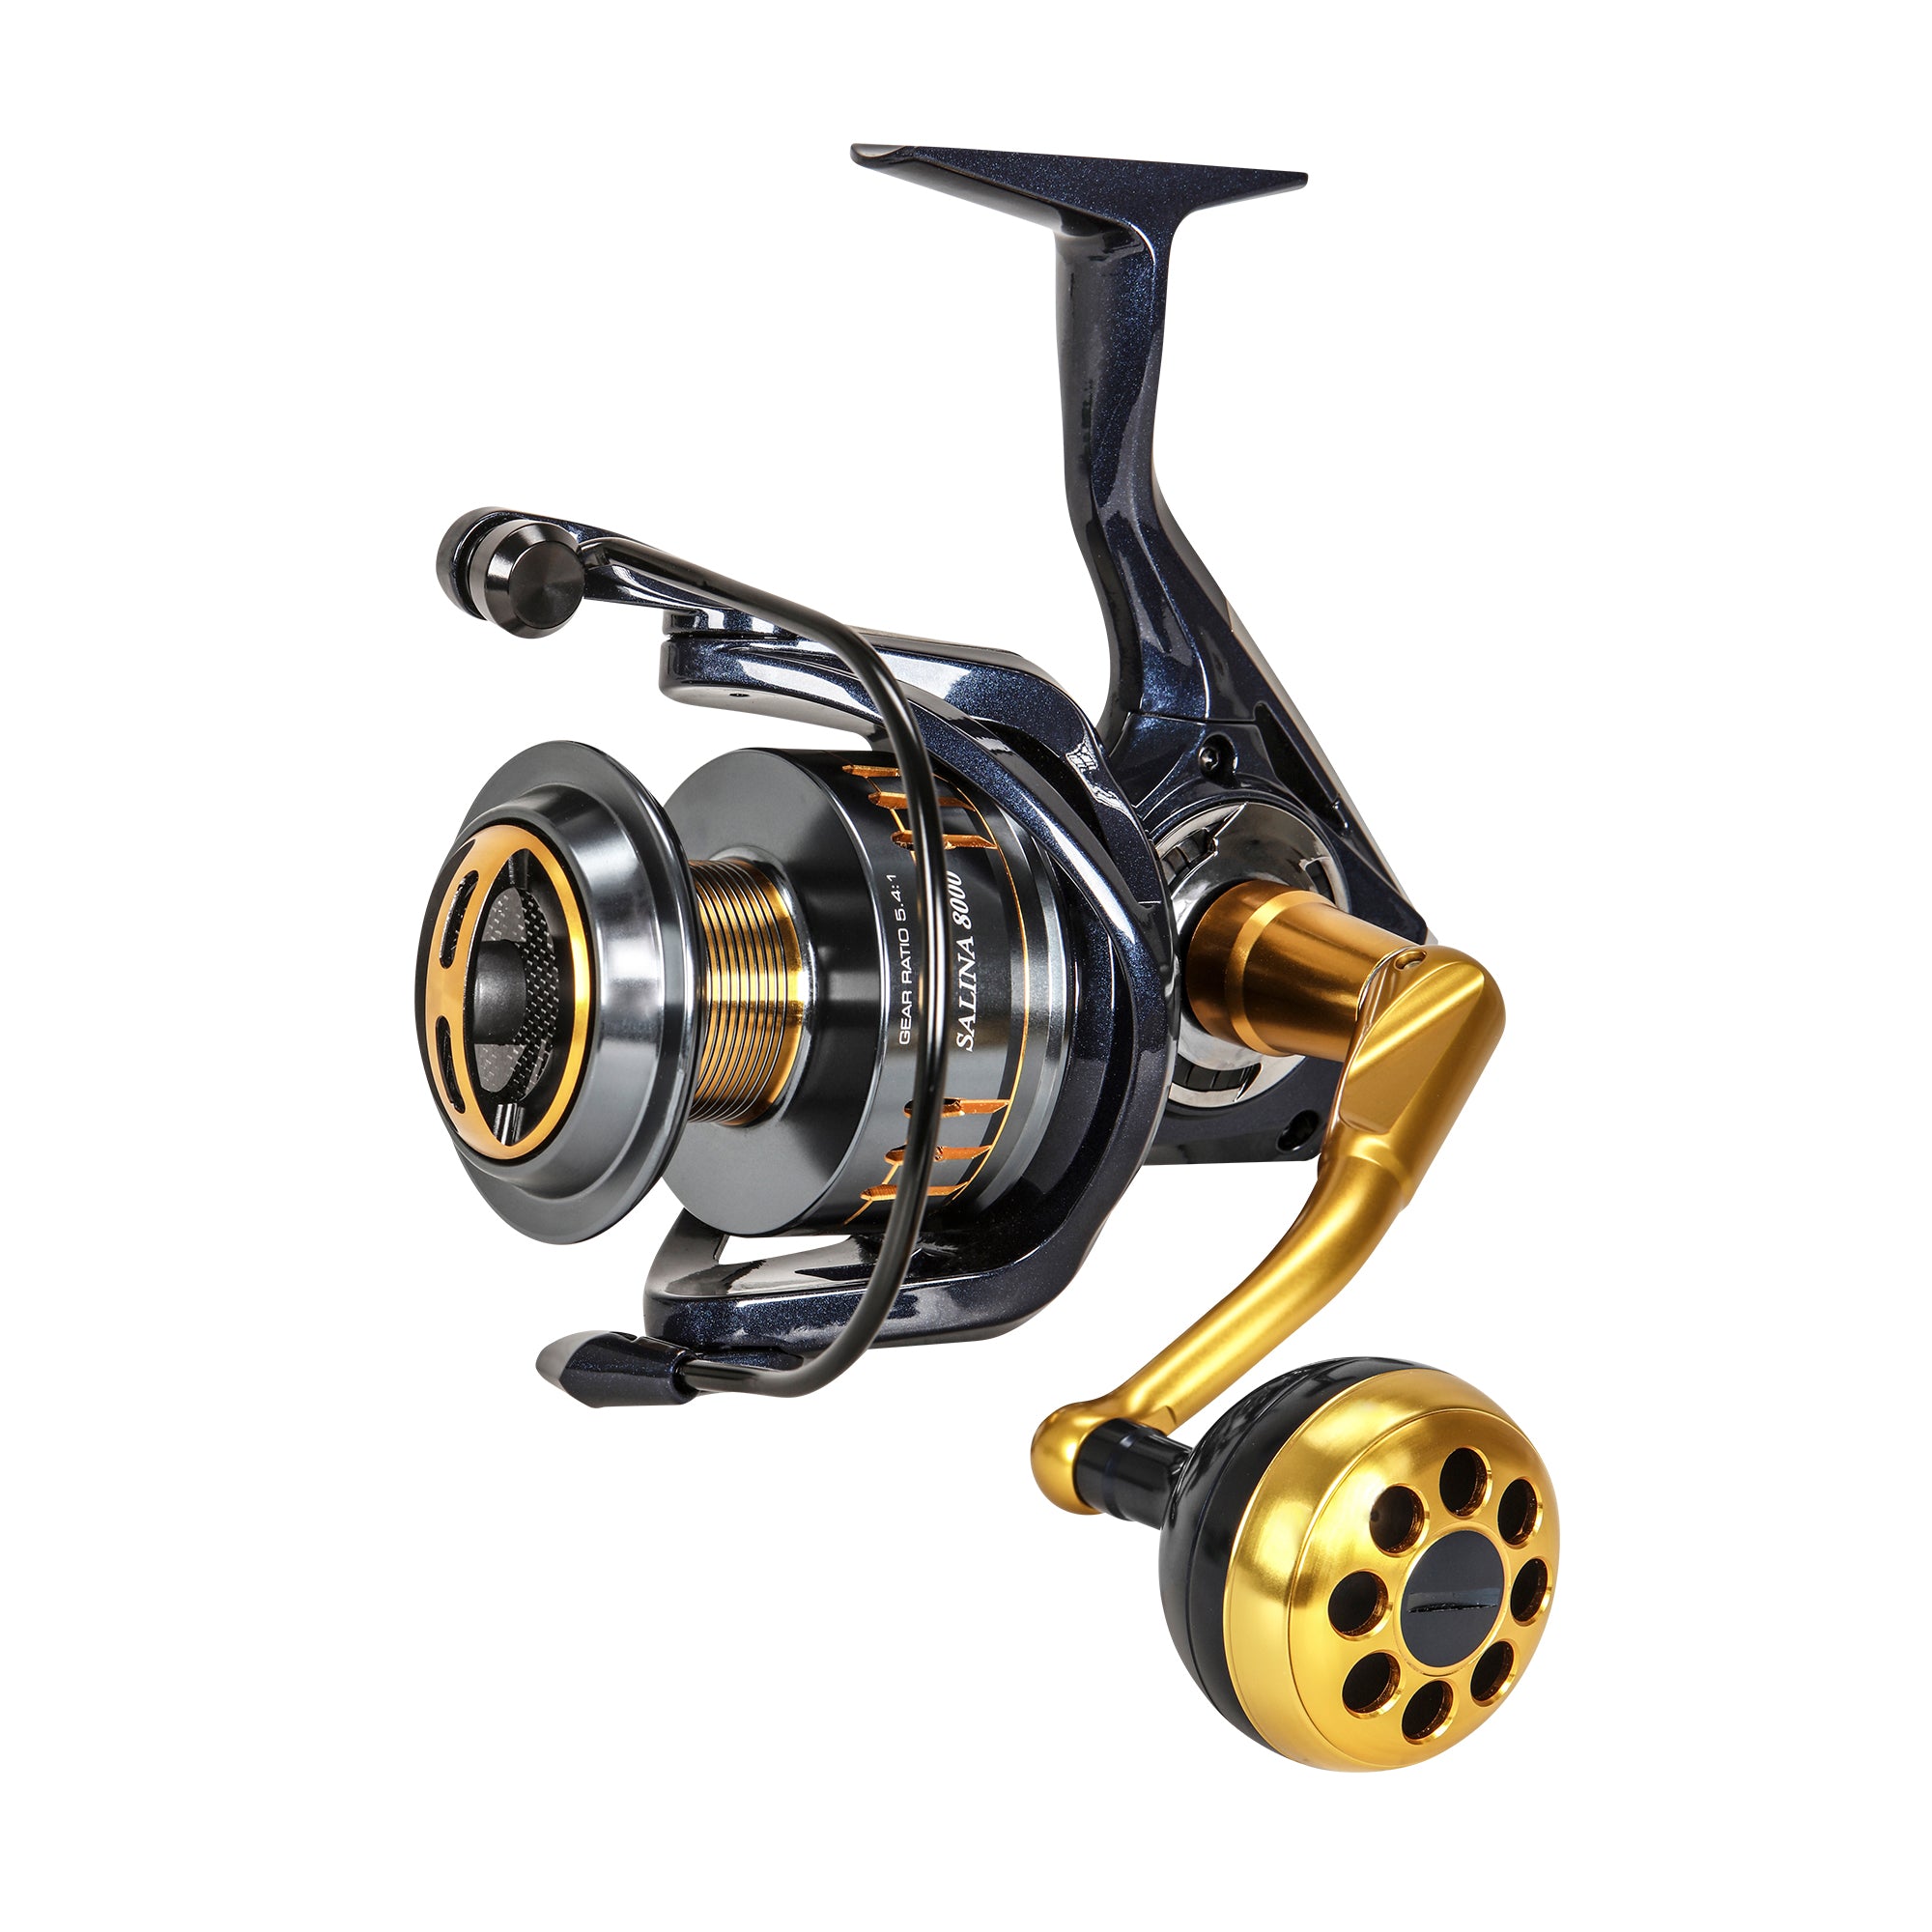 How to Change a Fishing Reel from Right to Left-Handed